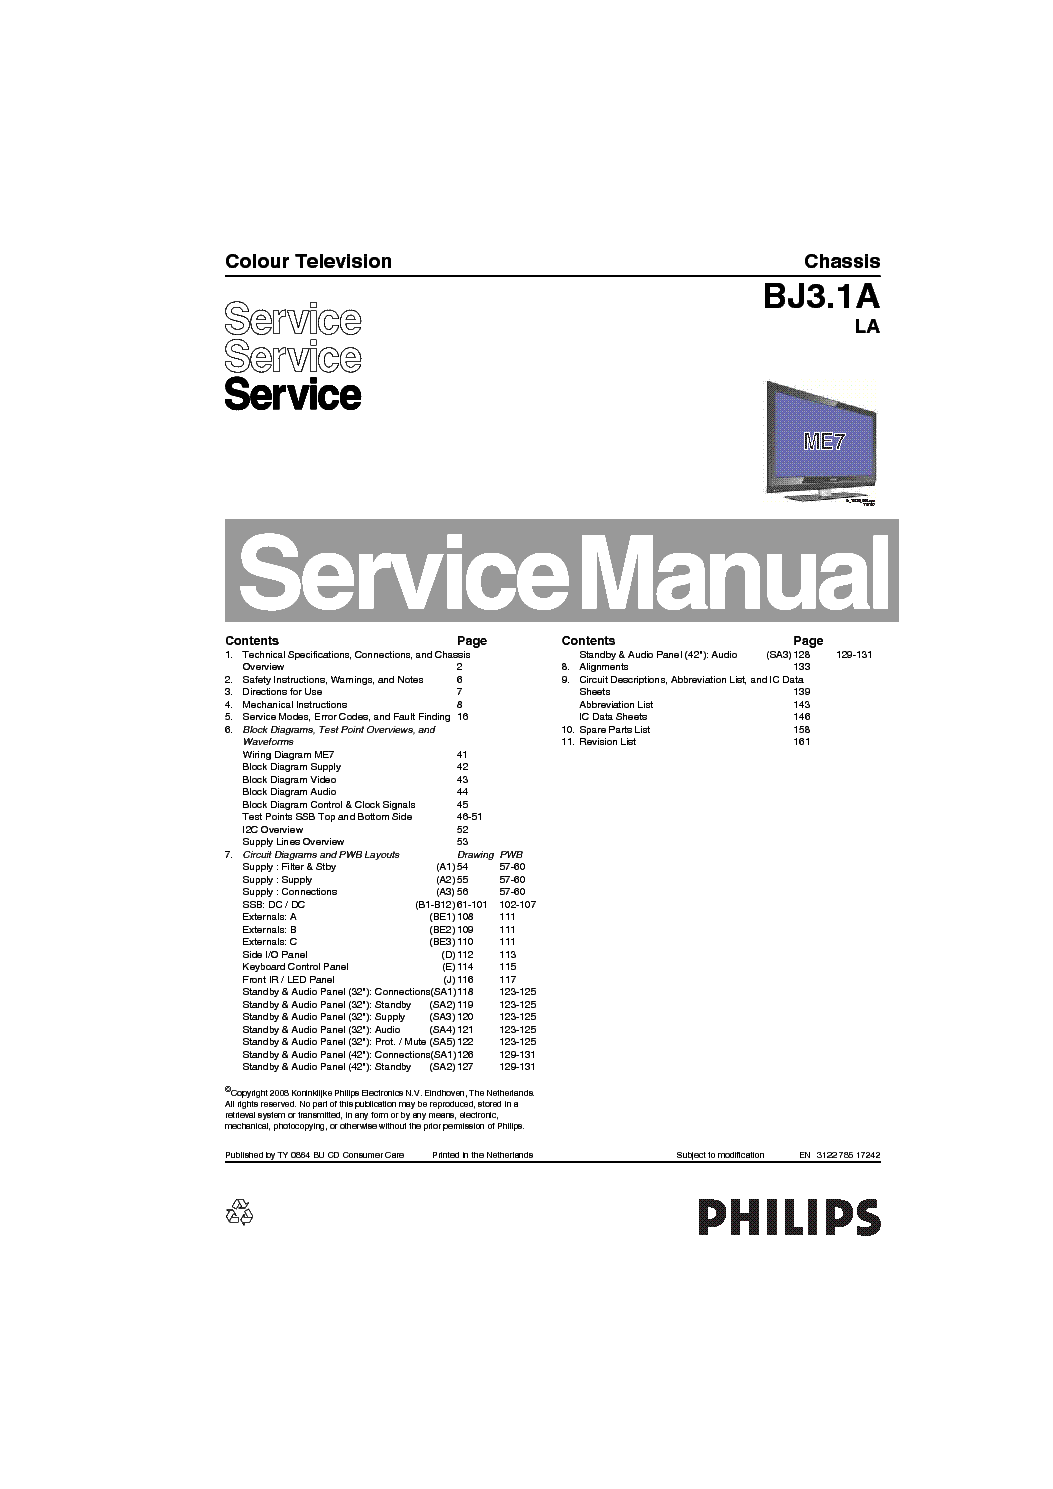 PHILIPS BJ3.1A-LA CHASSIS SM service manual (1st page)